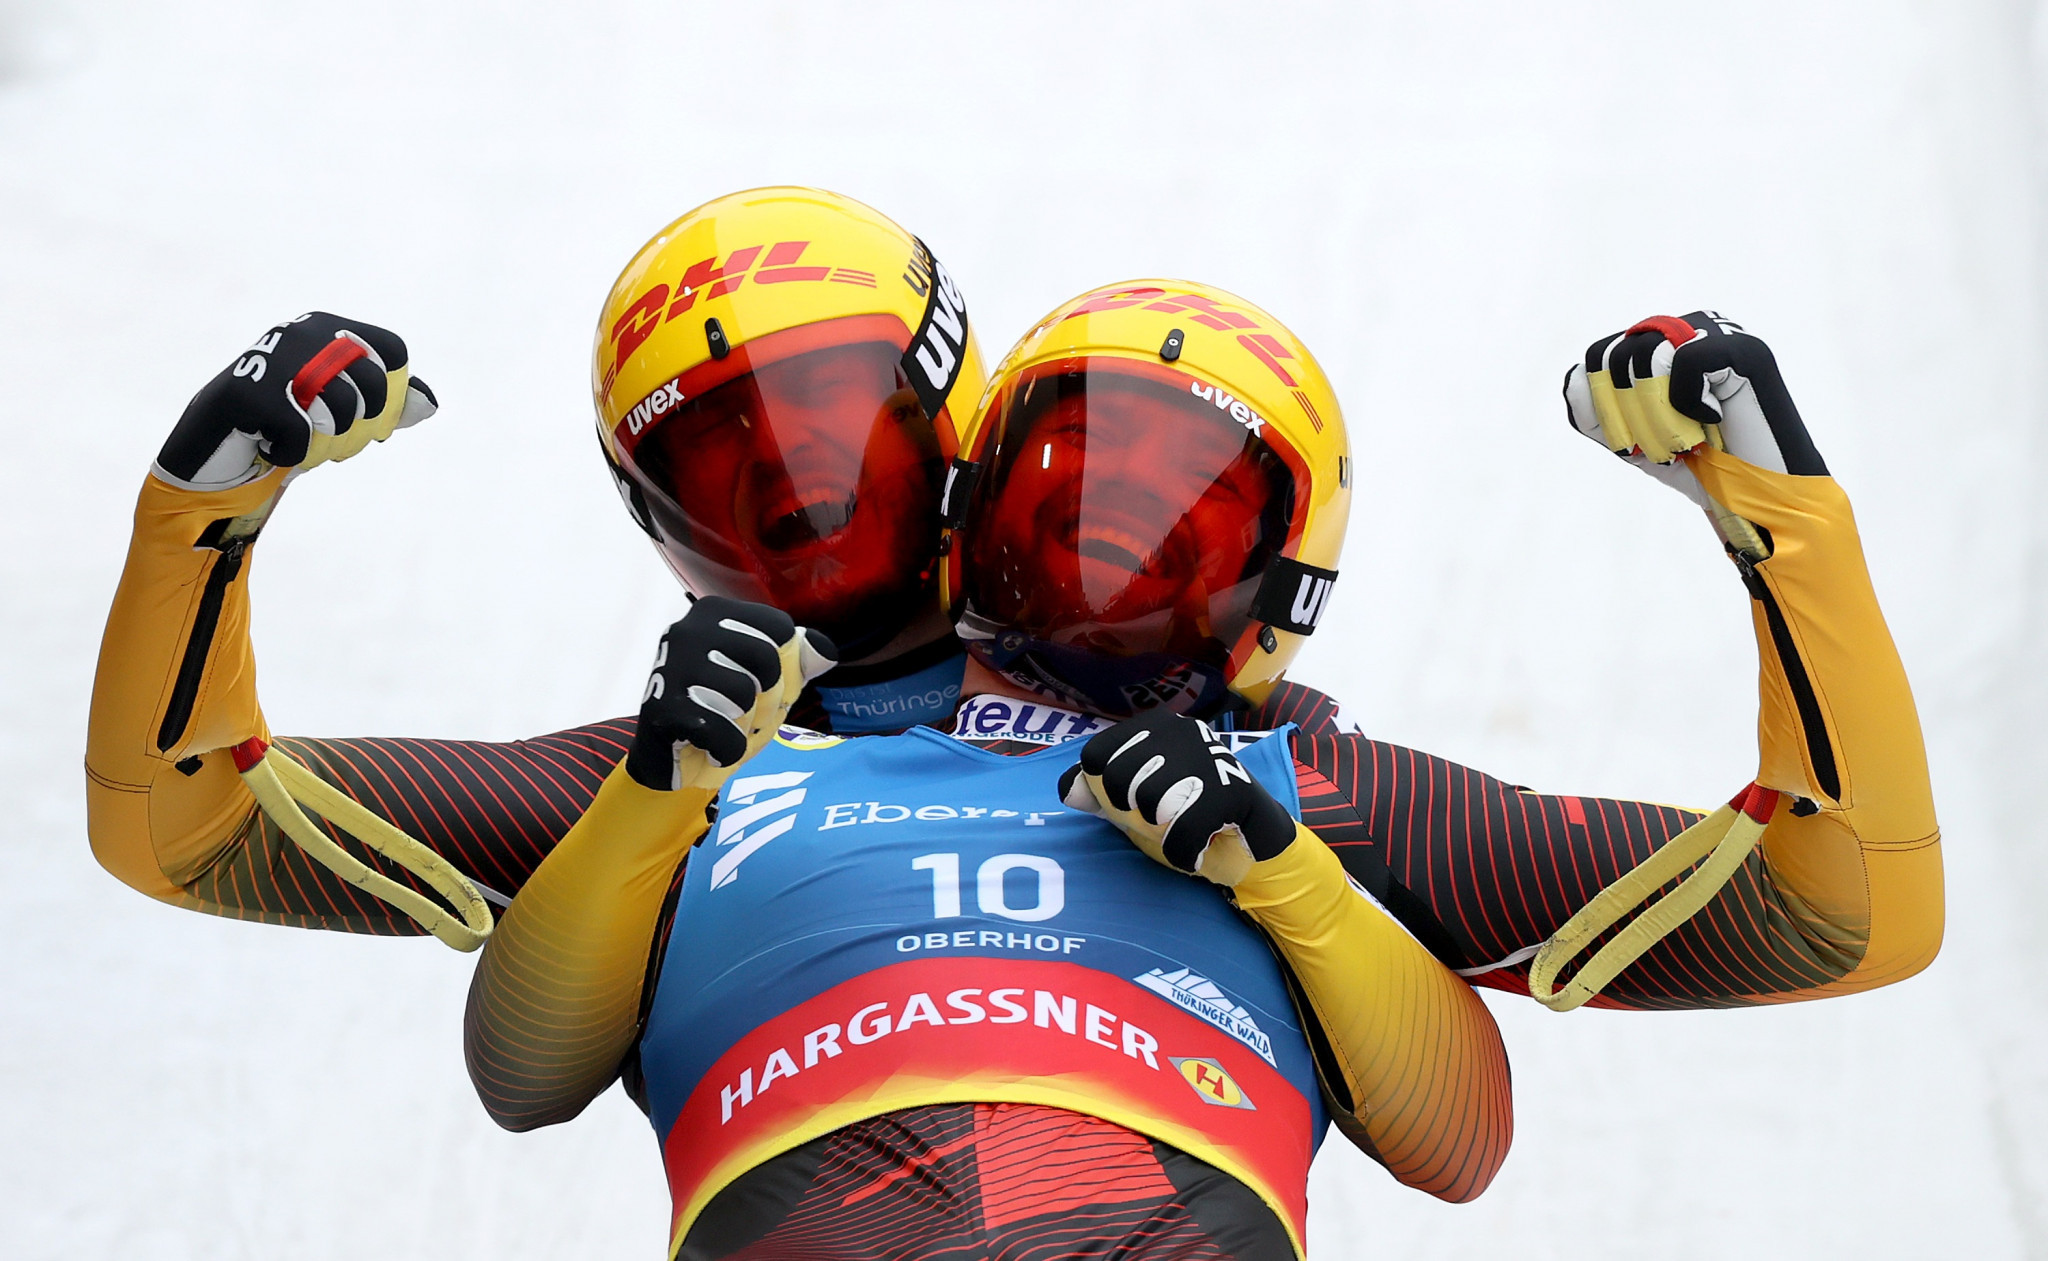 Germany and Italy claim doubles golds at FIL World Cup in Altenberg